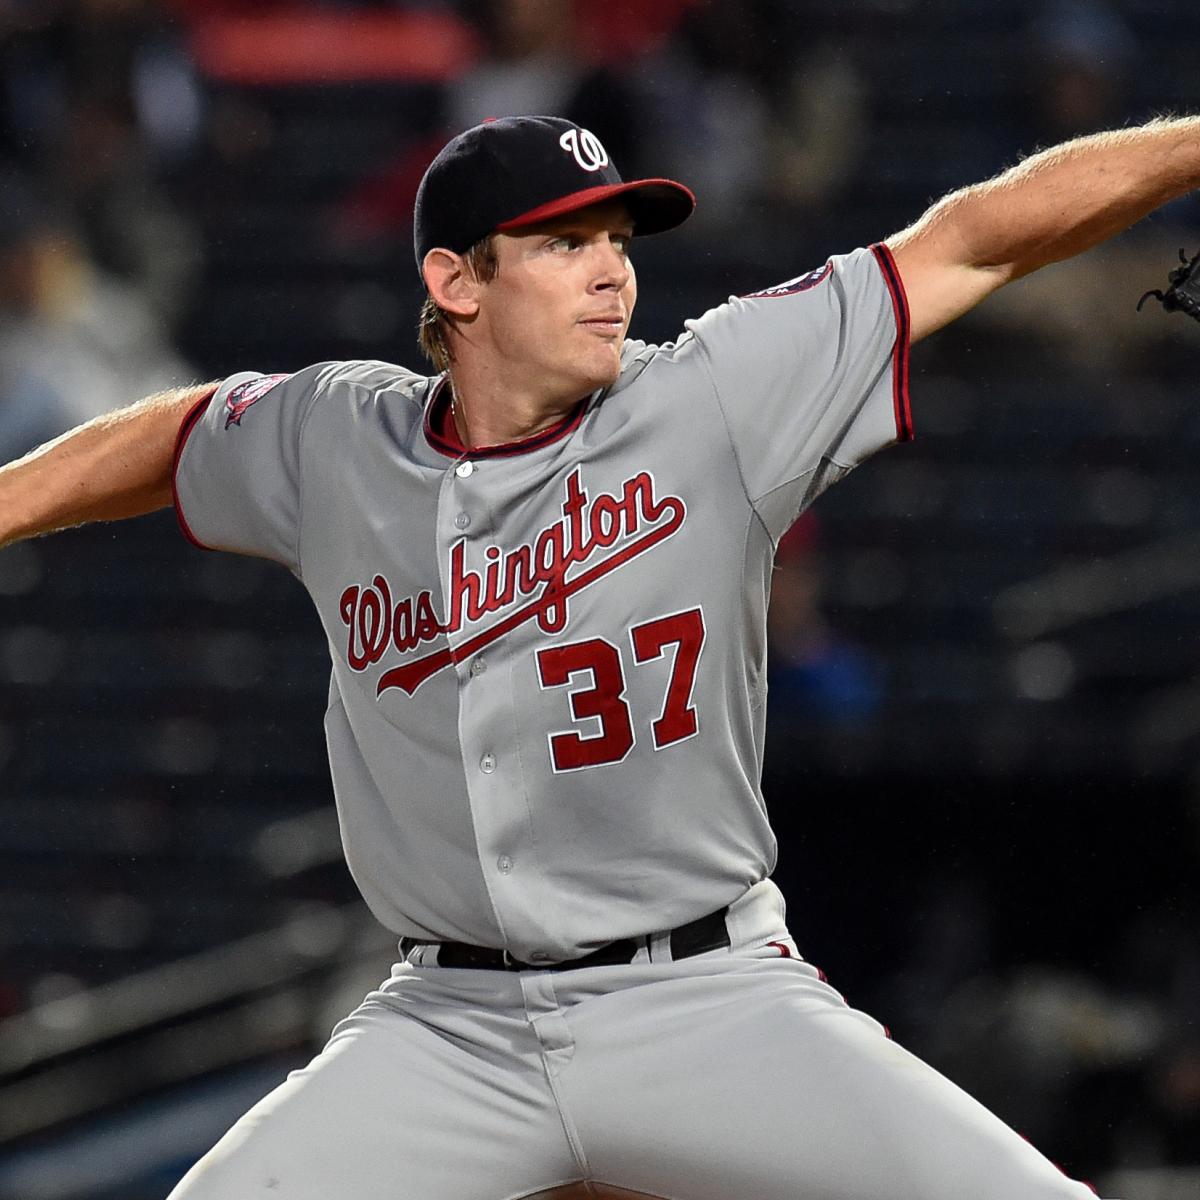 A comparison of Stephen Strasburg and Greg Maddux's pitching